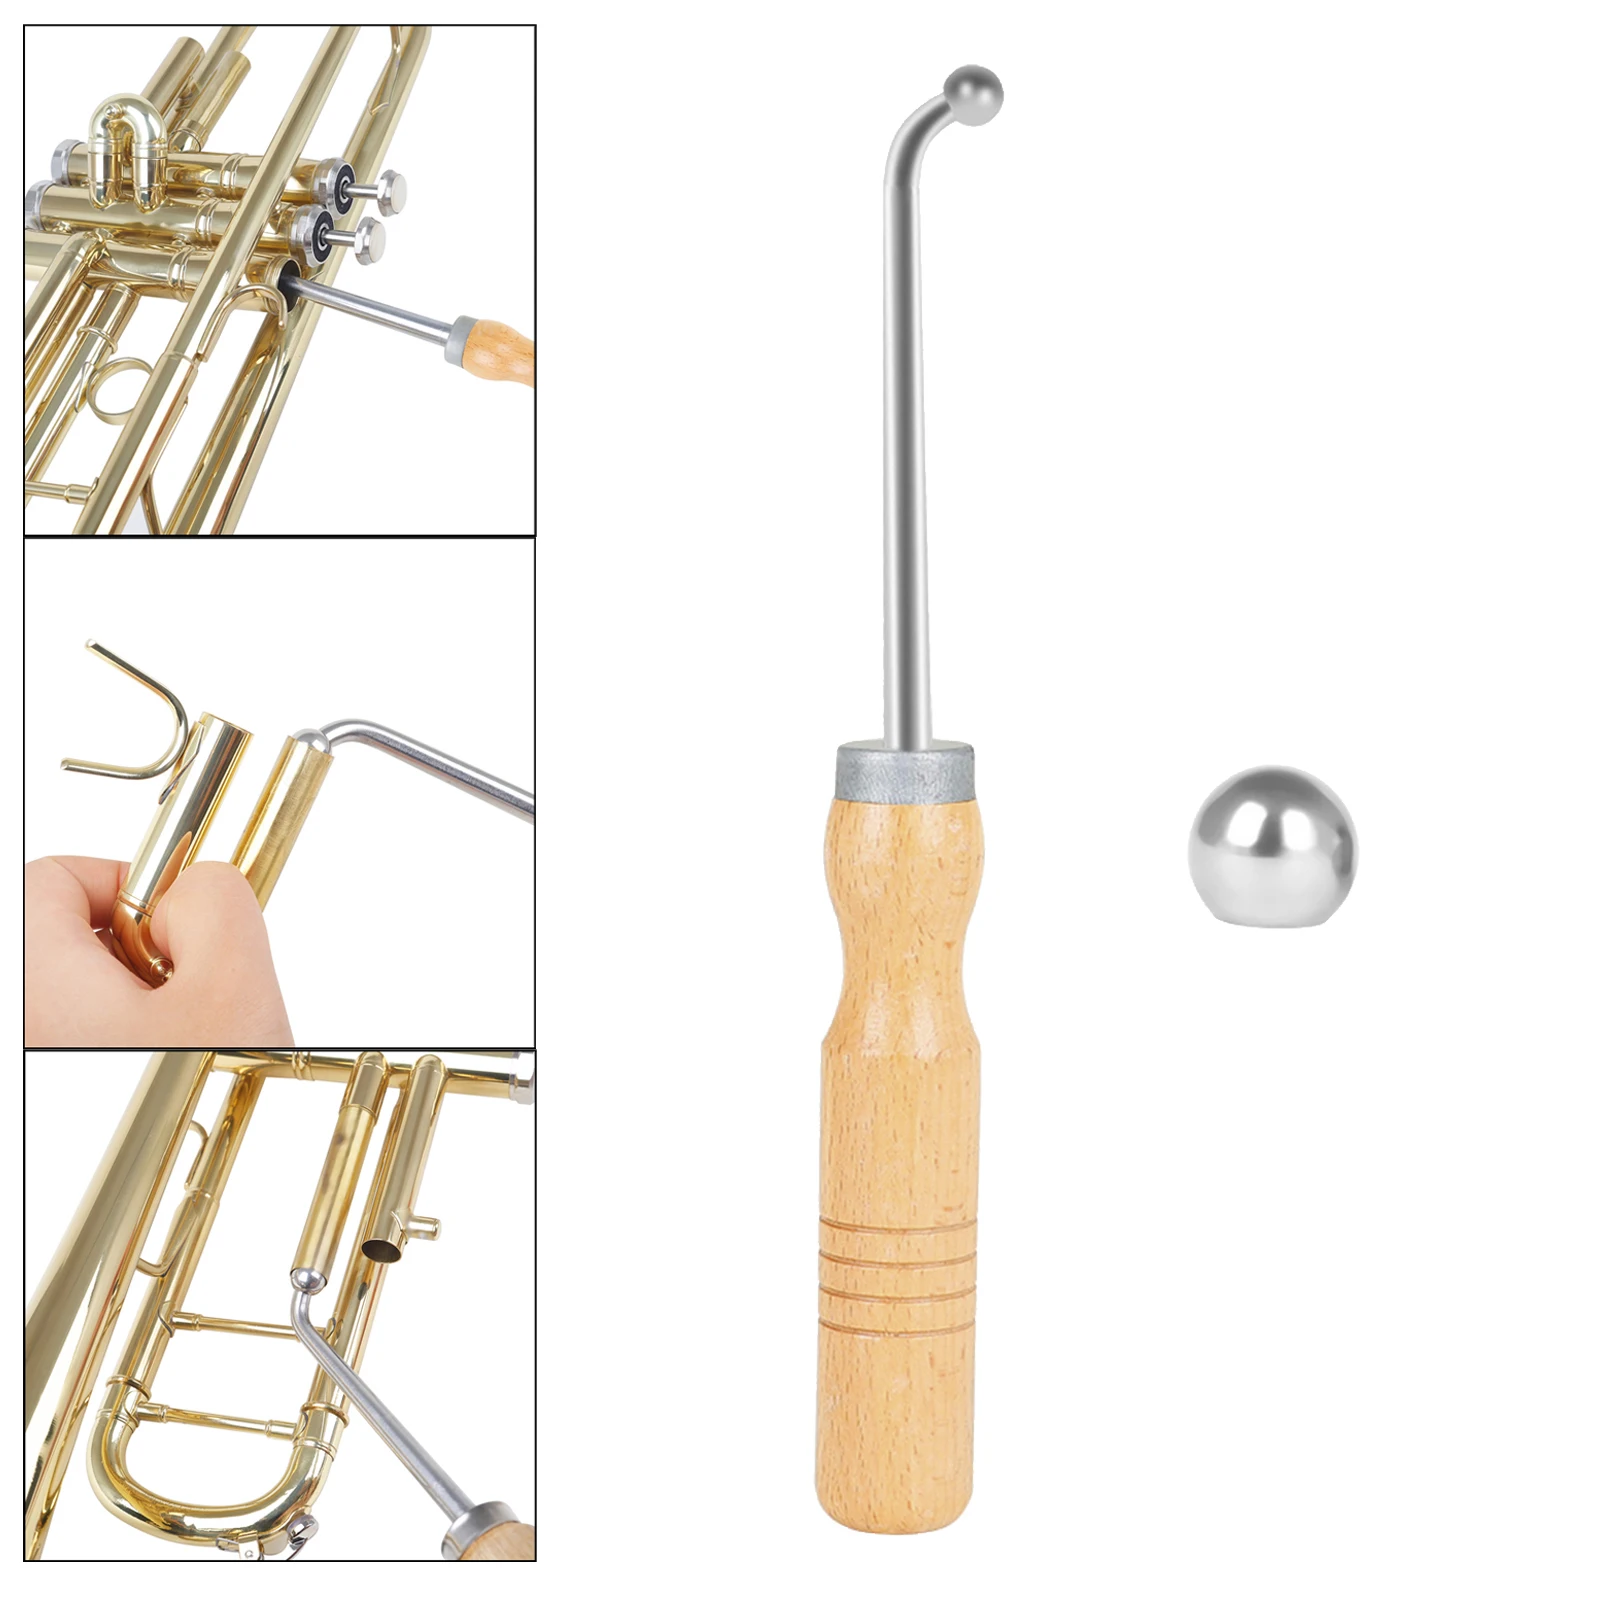 Trumpet Repair Tool Polished Maintenance with 2 Metal Balls Accessories Parts